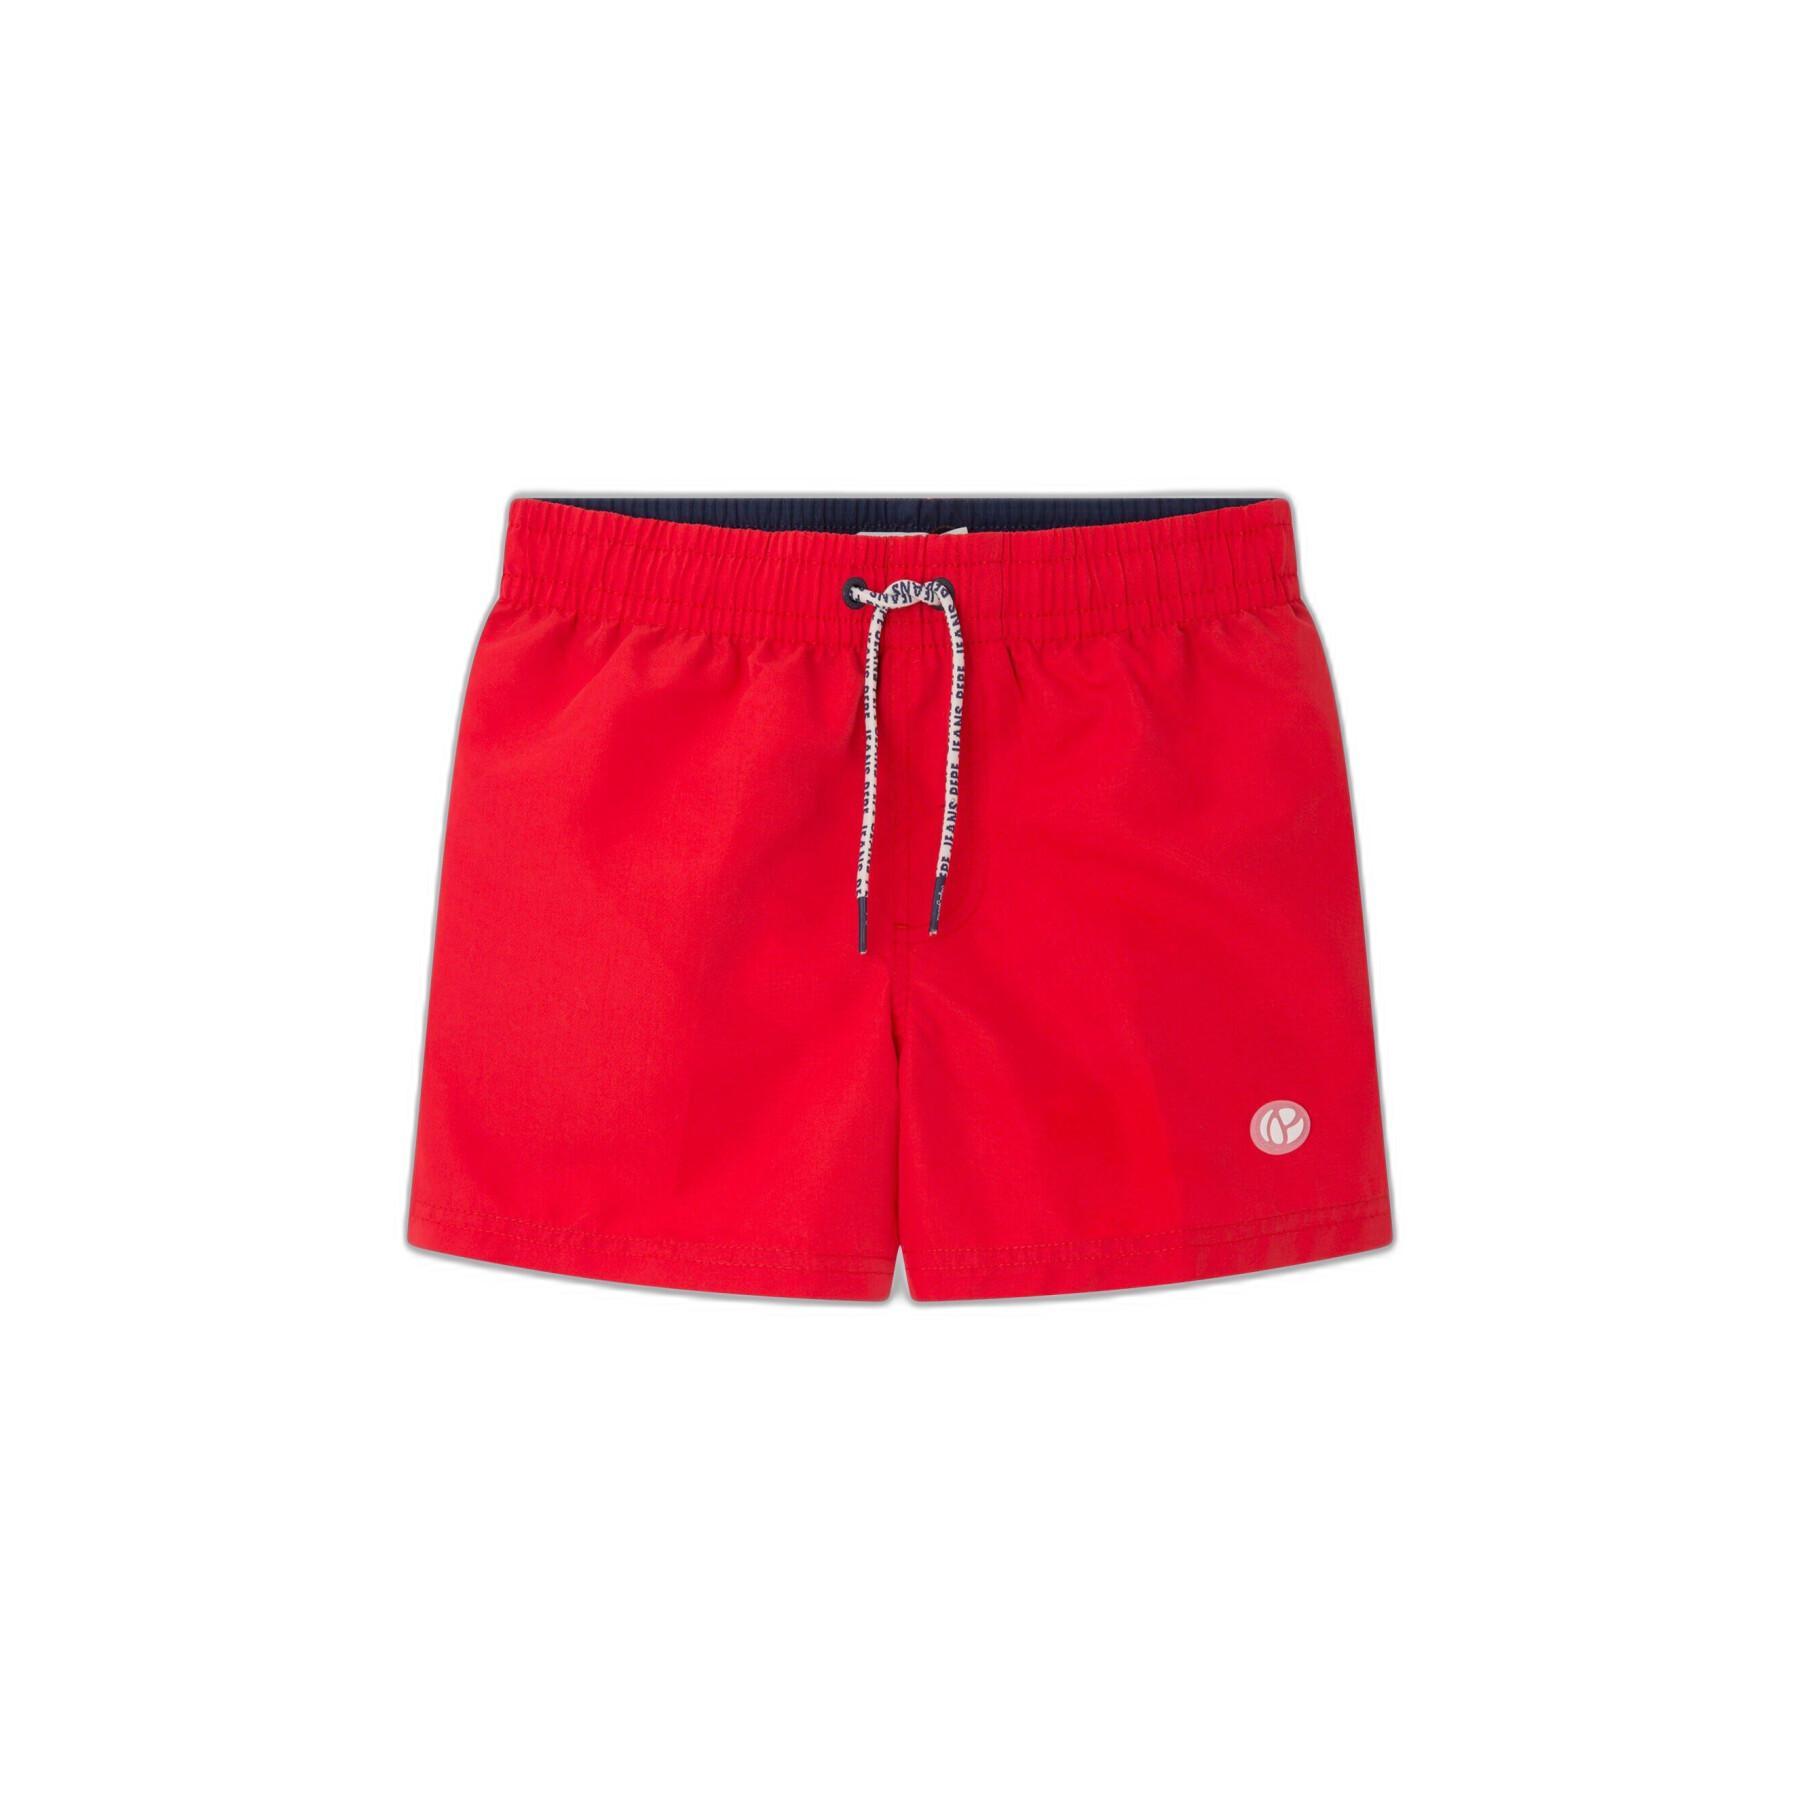 Children's swimming shorts Pepe Jeans Gayle